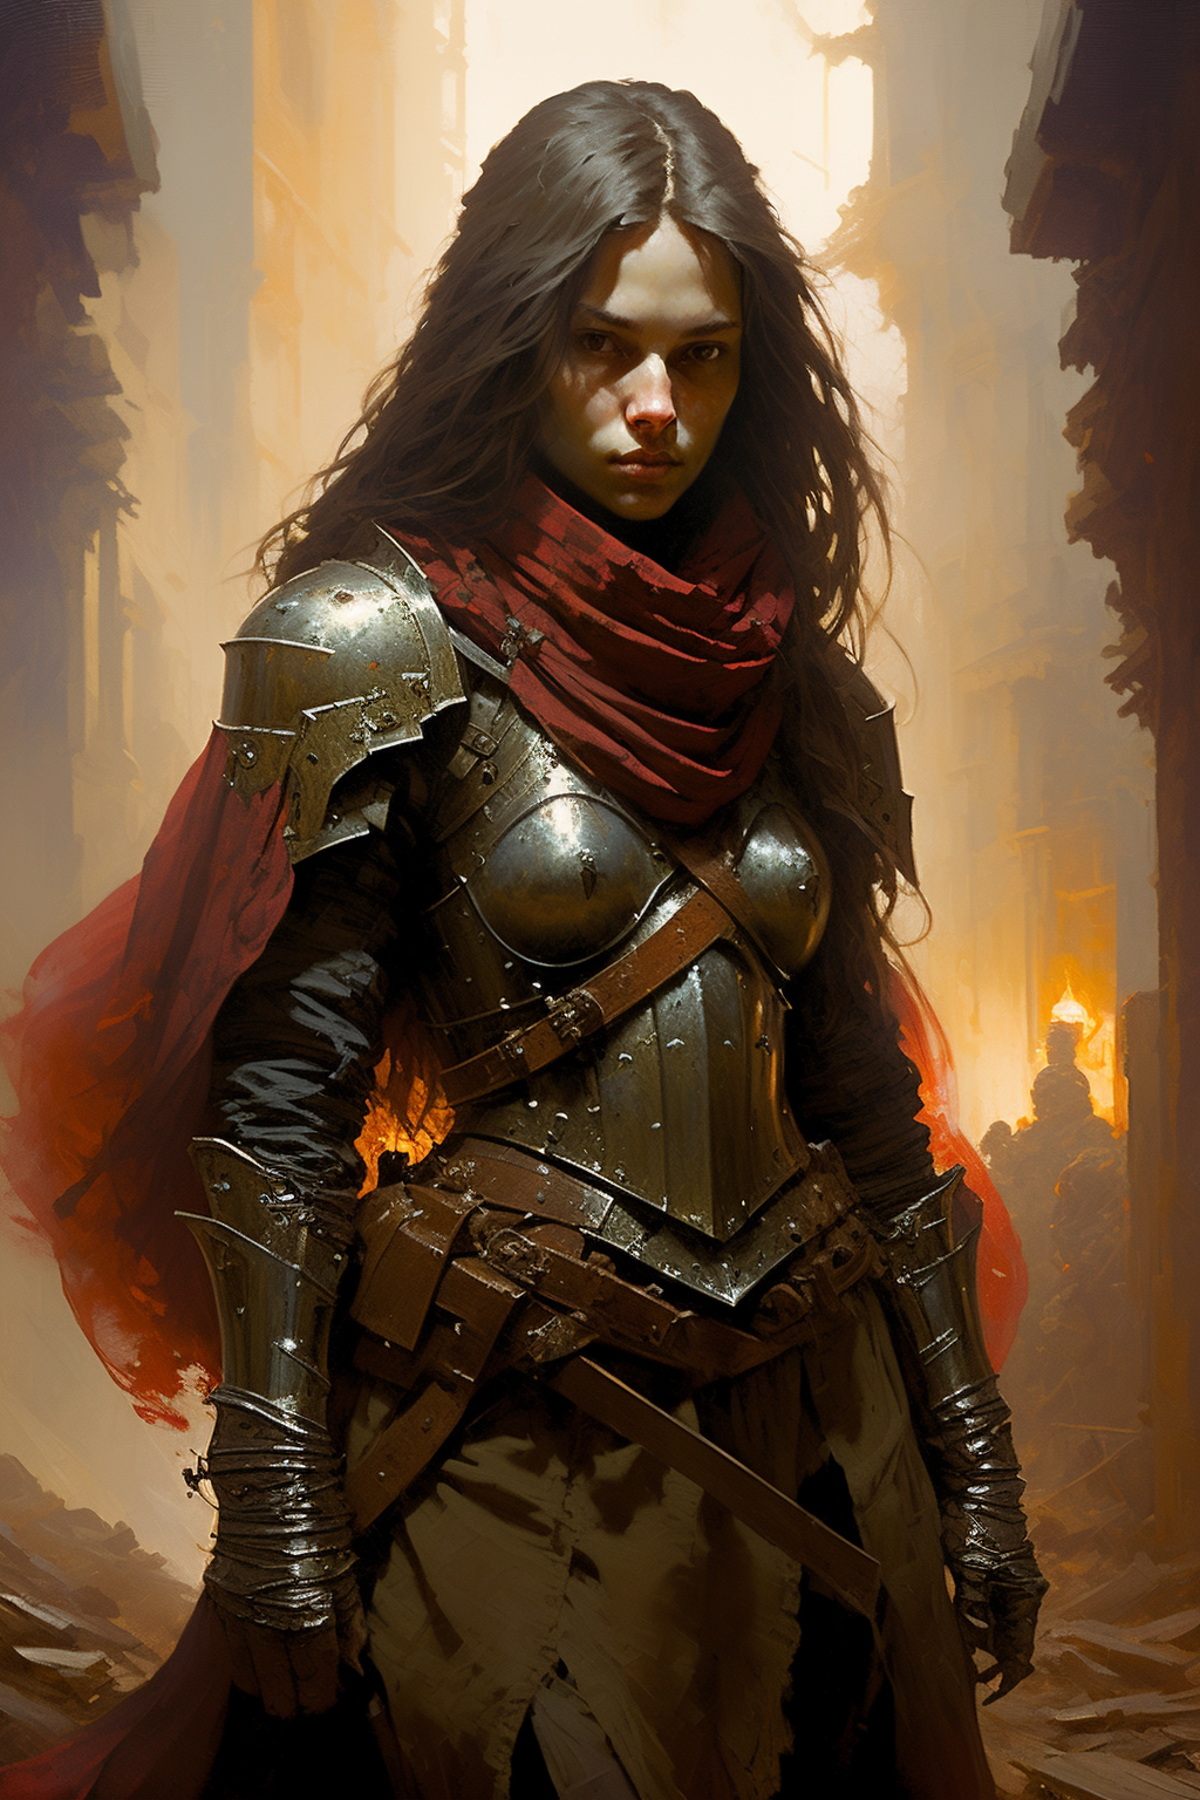 A female warrior in medieval armor with a red scarf, holding a sword and wearing a belt.